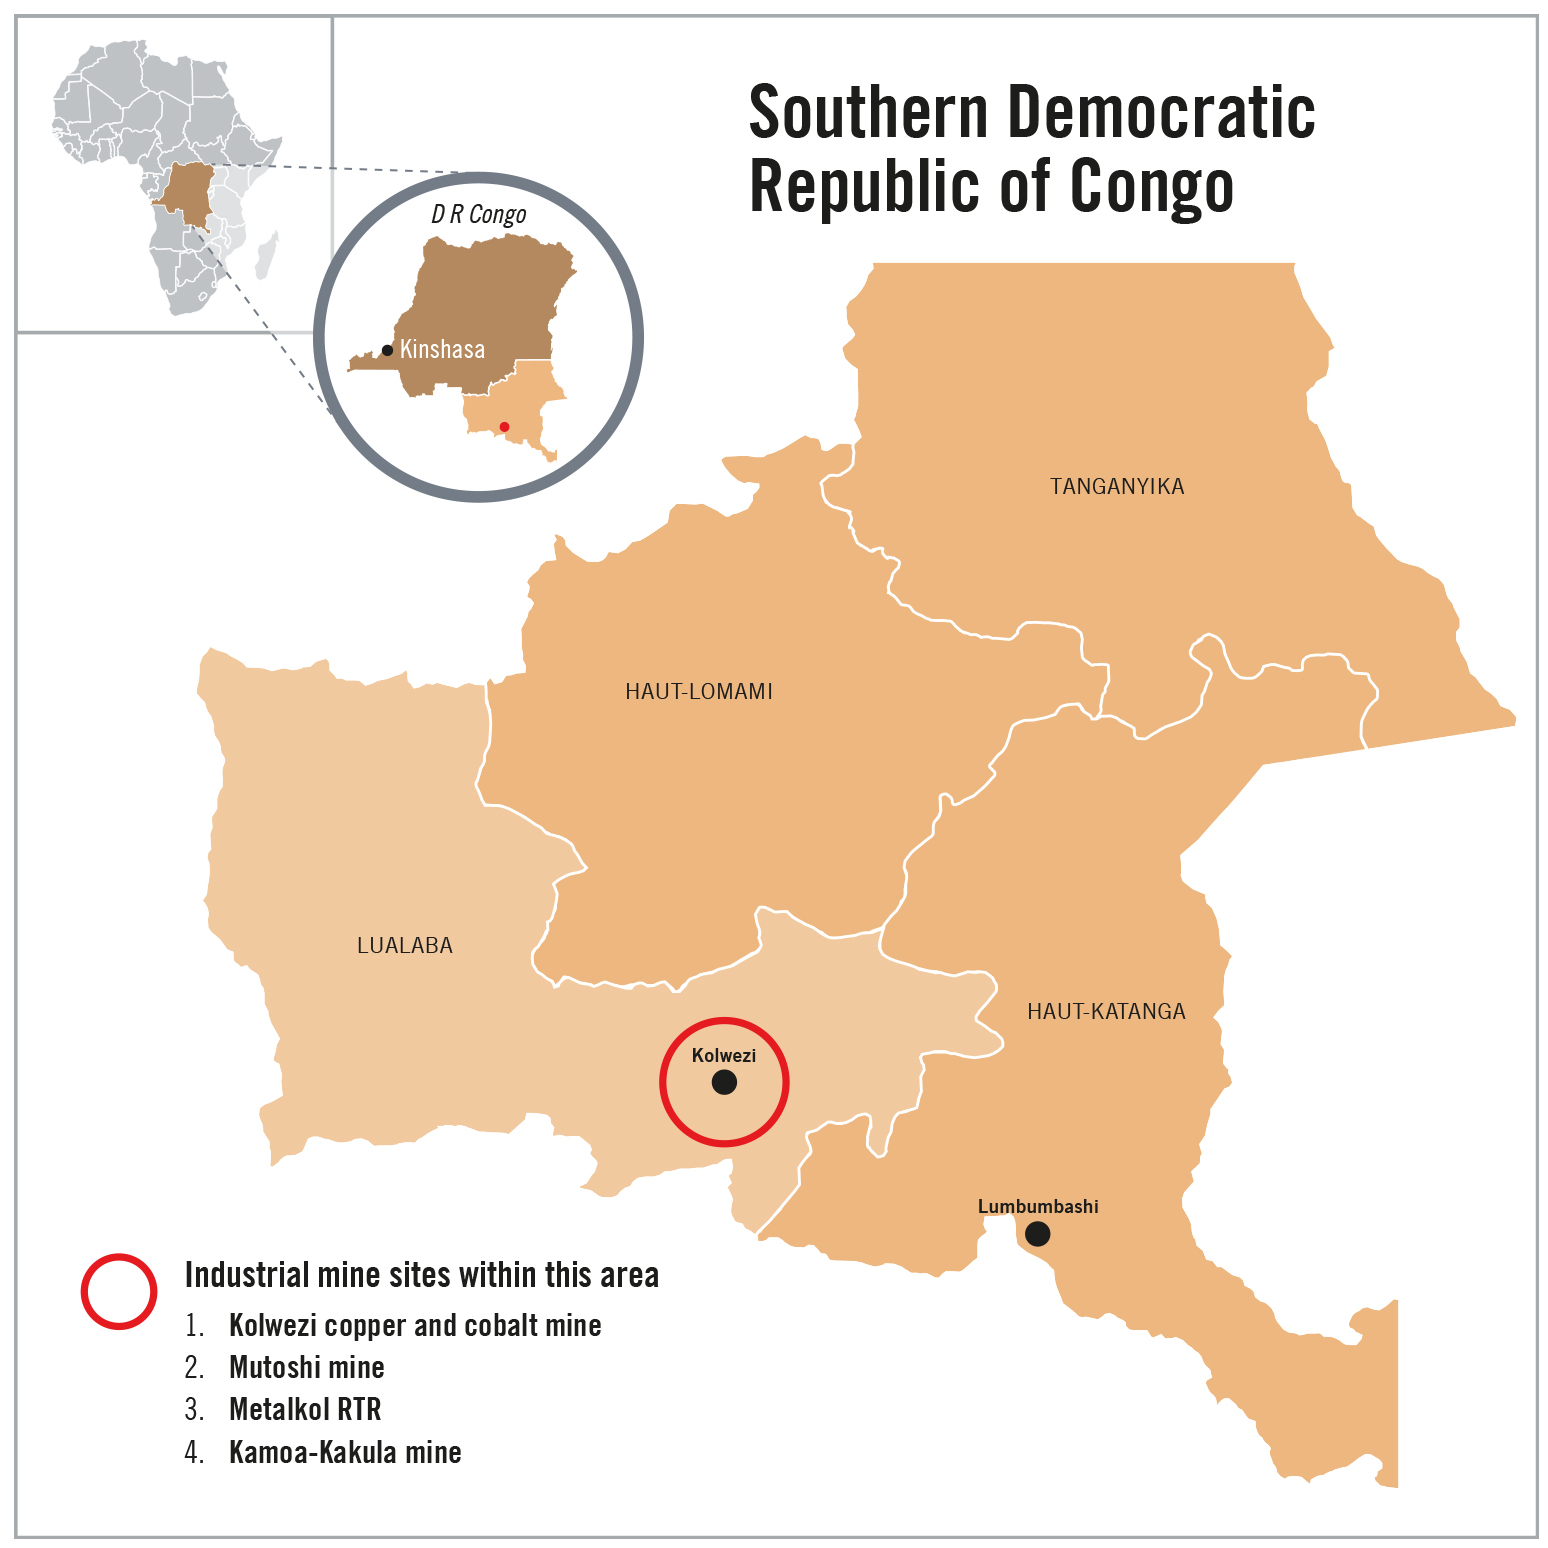 Map of Southern Democratic Republic of Congo. Four industrial mine sites are pinpointed in this area: 1. Kolwezi copper and cobalt mine 2. Mutoshi mine 3. Metalkol RTR 4. Kamoa-Kakula mine